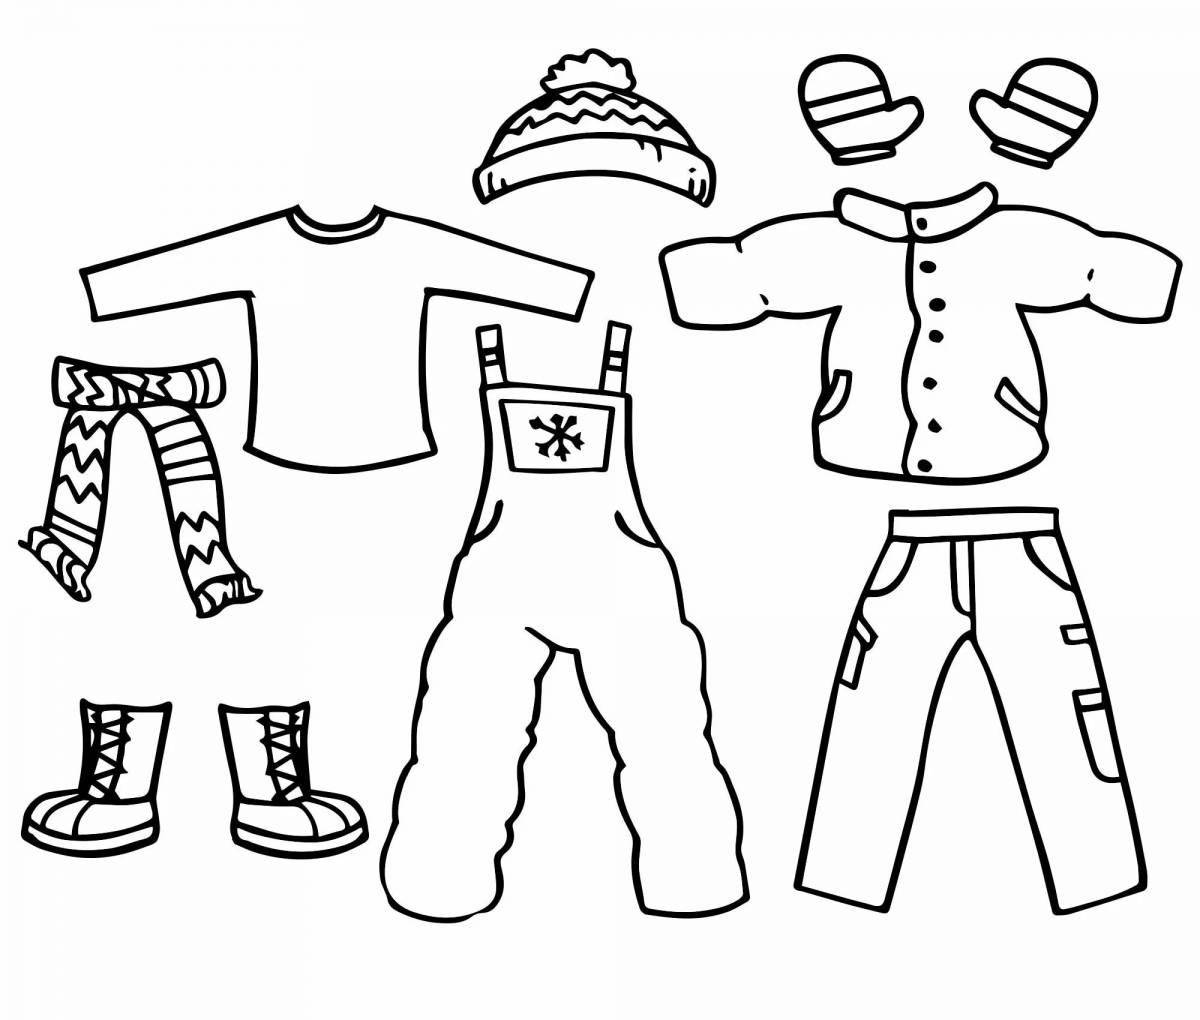 Fun winter clothes coloring pages for kids